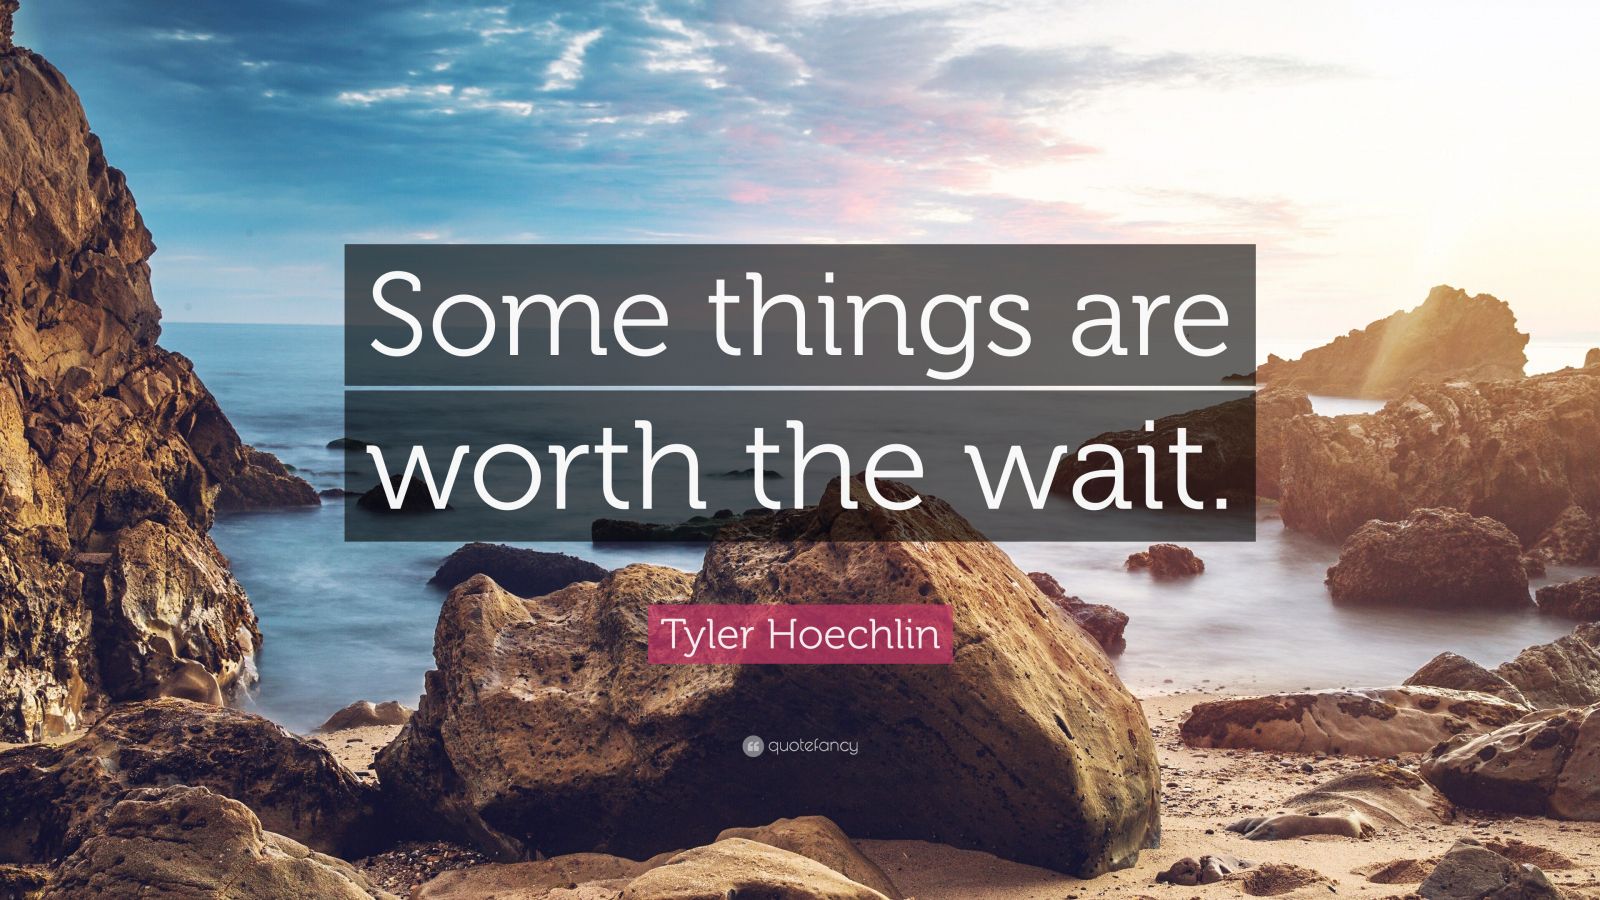 Tyler Hoechlin Quote: "Some things are worth the wait." (12 wallpapers) - Quotefancy